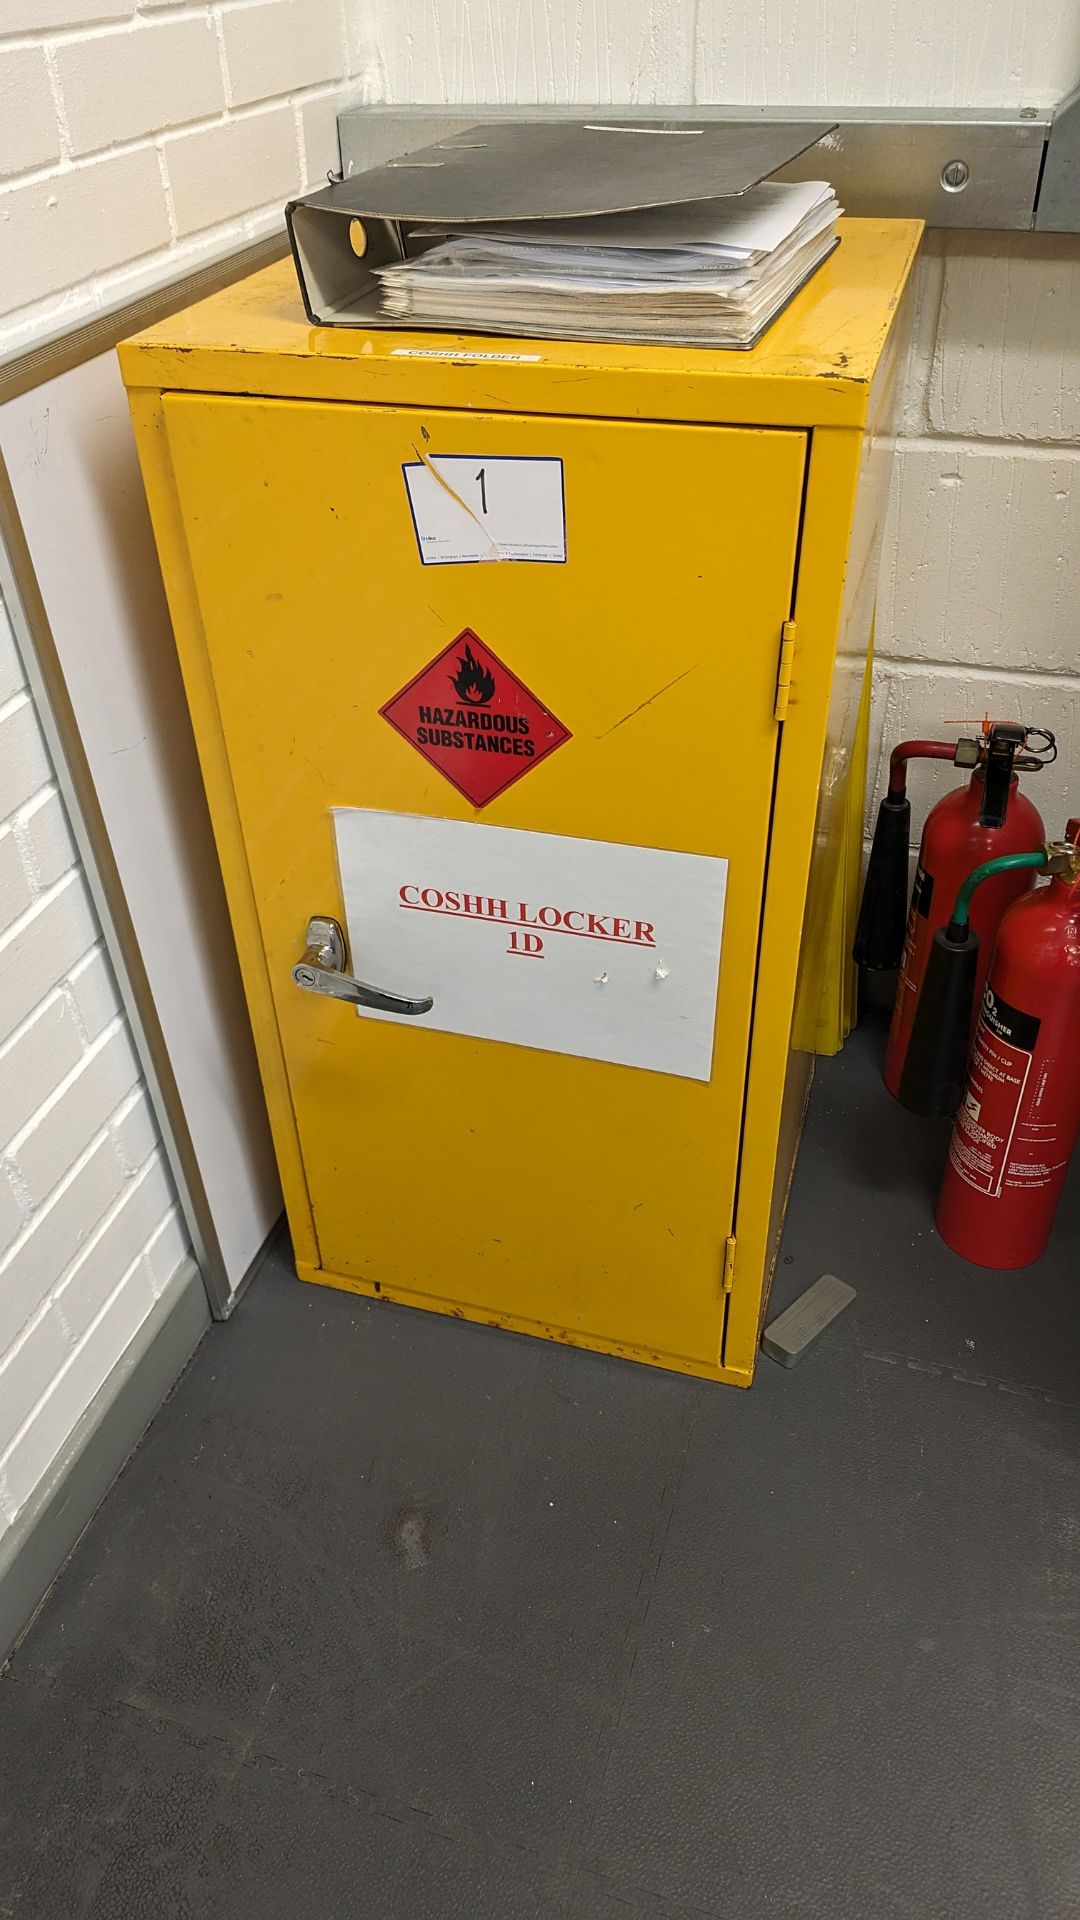 COSSH Locker and contents